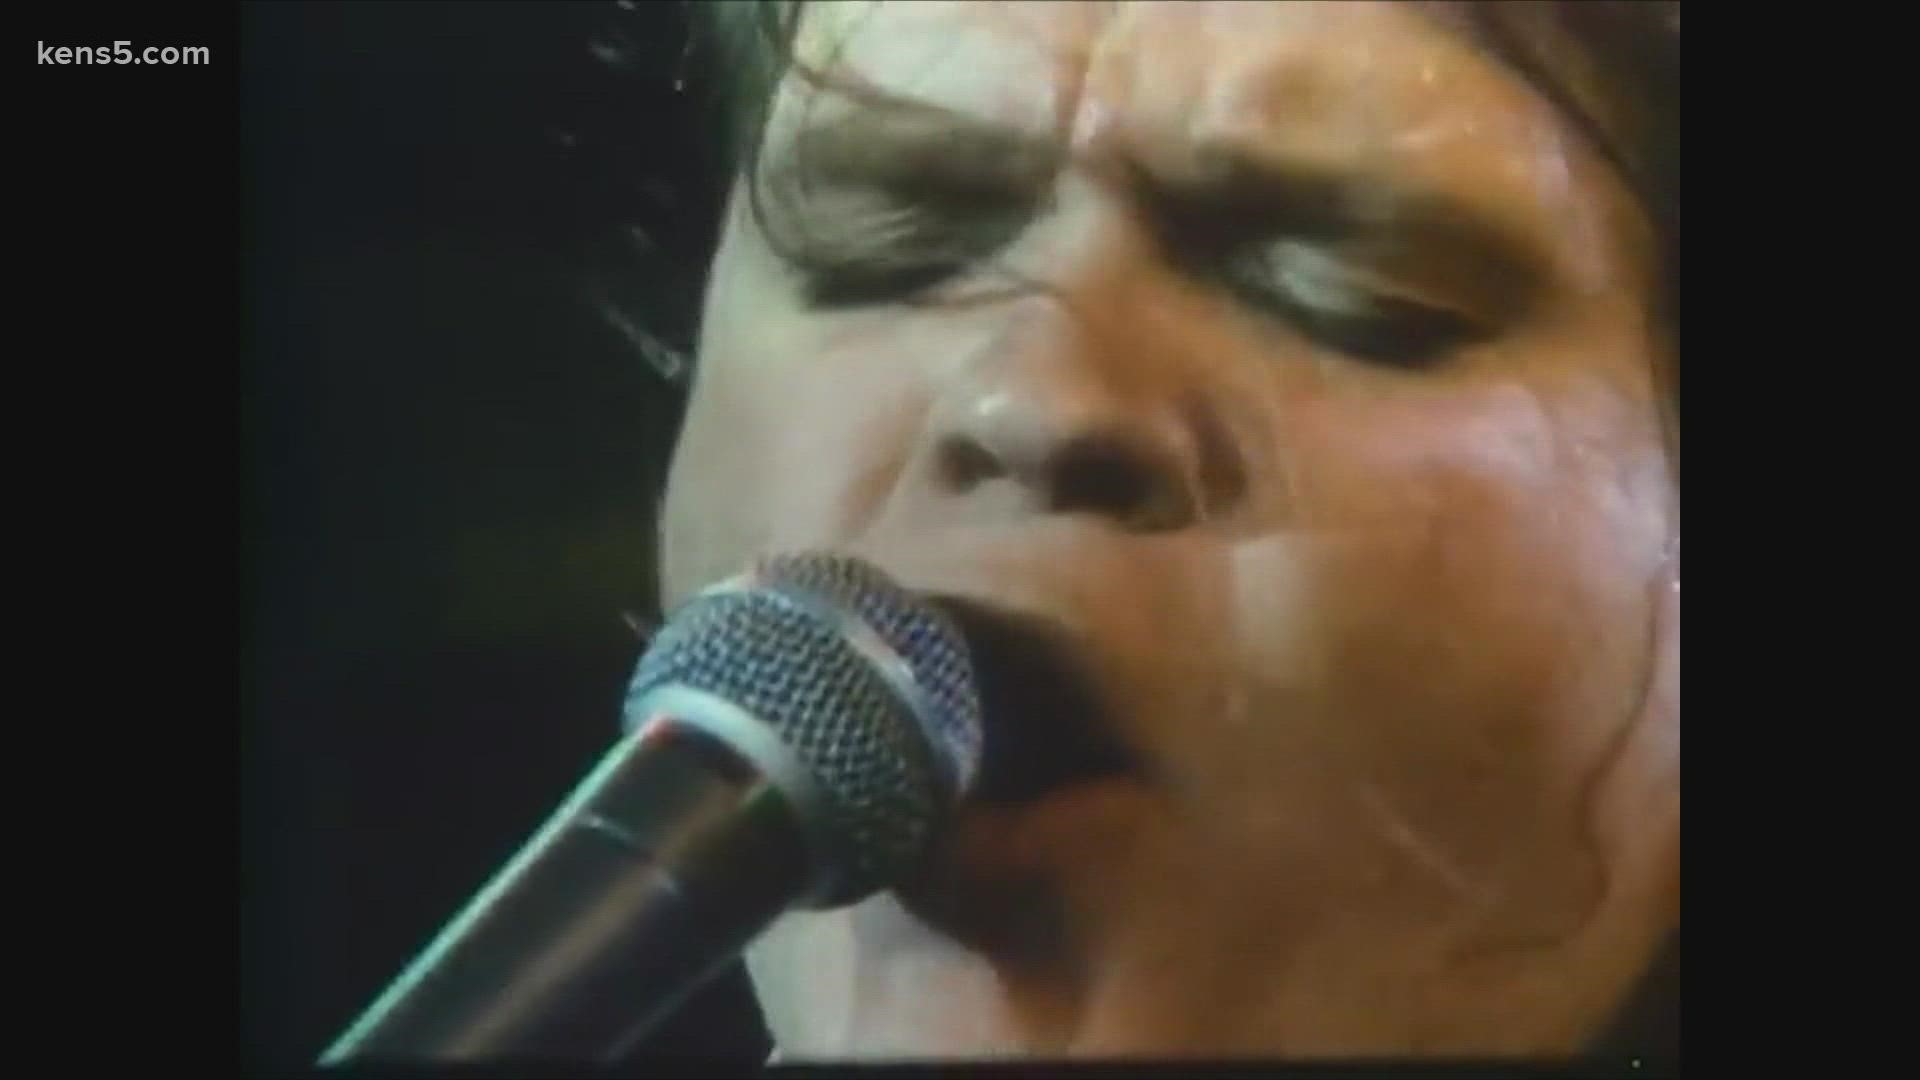 The entertainment world lost two figures early Friday morning; Meat Loaf was 74, Anderson 68.